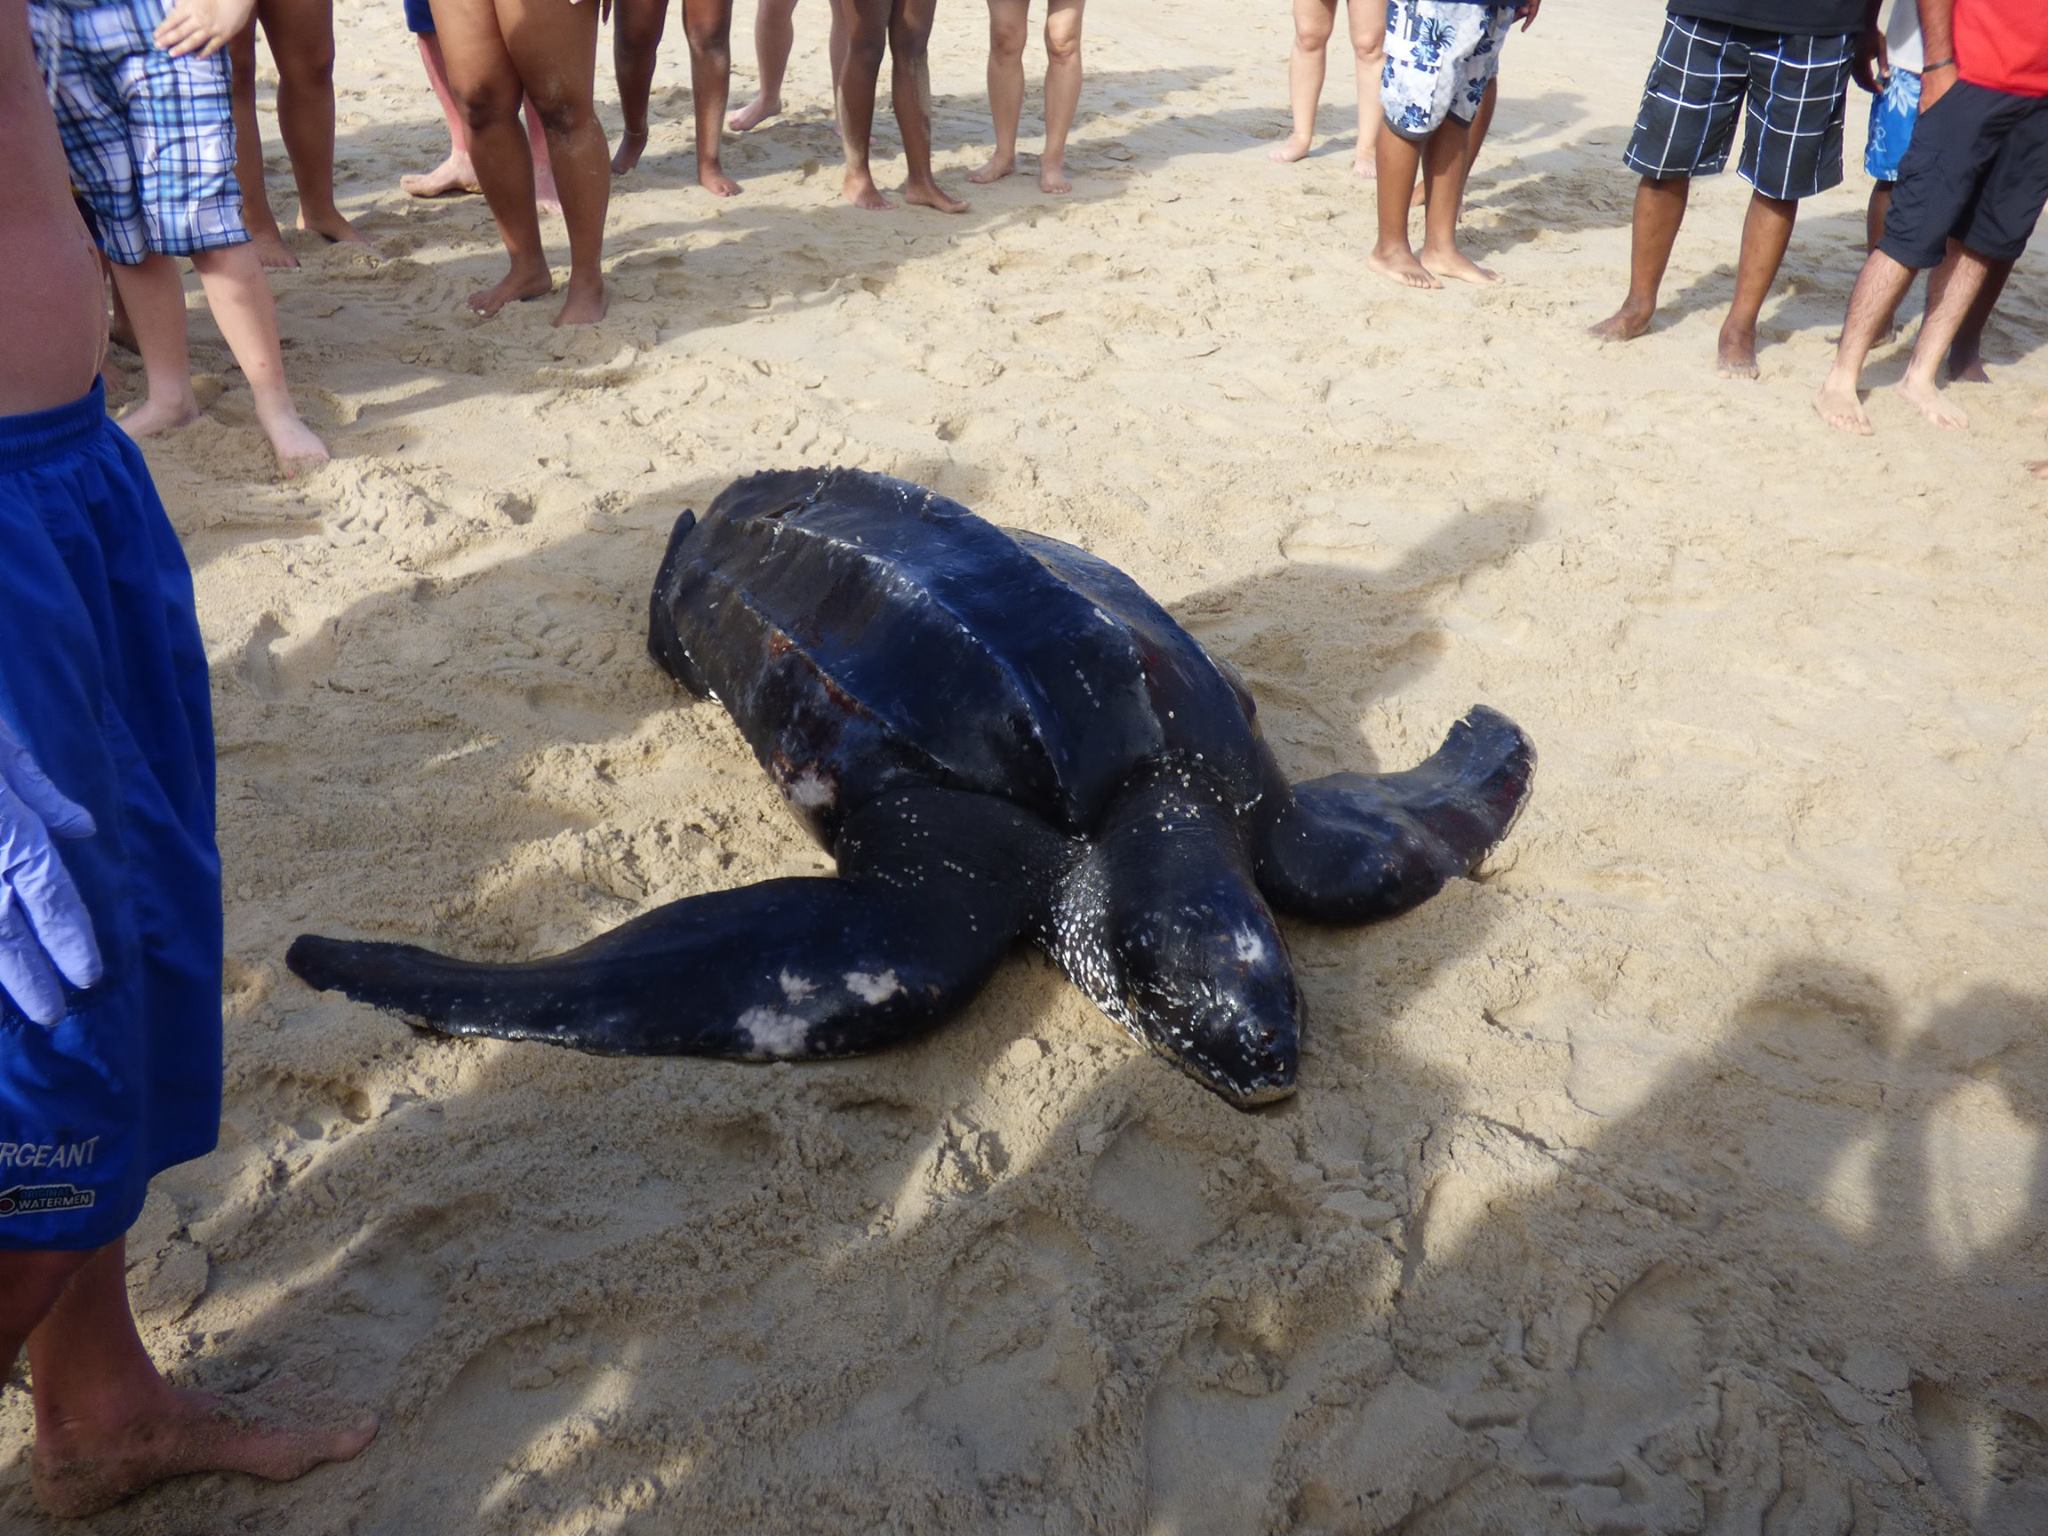 06/20/2017 Sea Turtle Washed Ashore In Ocean City On